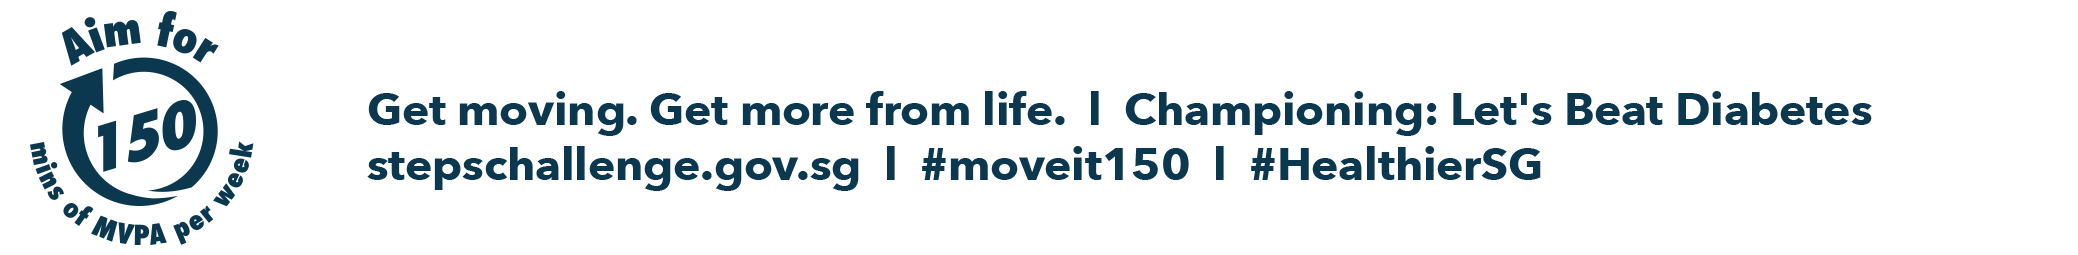 Aim for 10000 steps per day. Get moving. Get more from life. Championing: Let\'s Beat Diabetesstepschallenge.gov.sg #moveit150 #my10ktoday